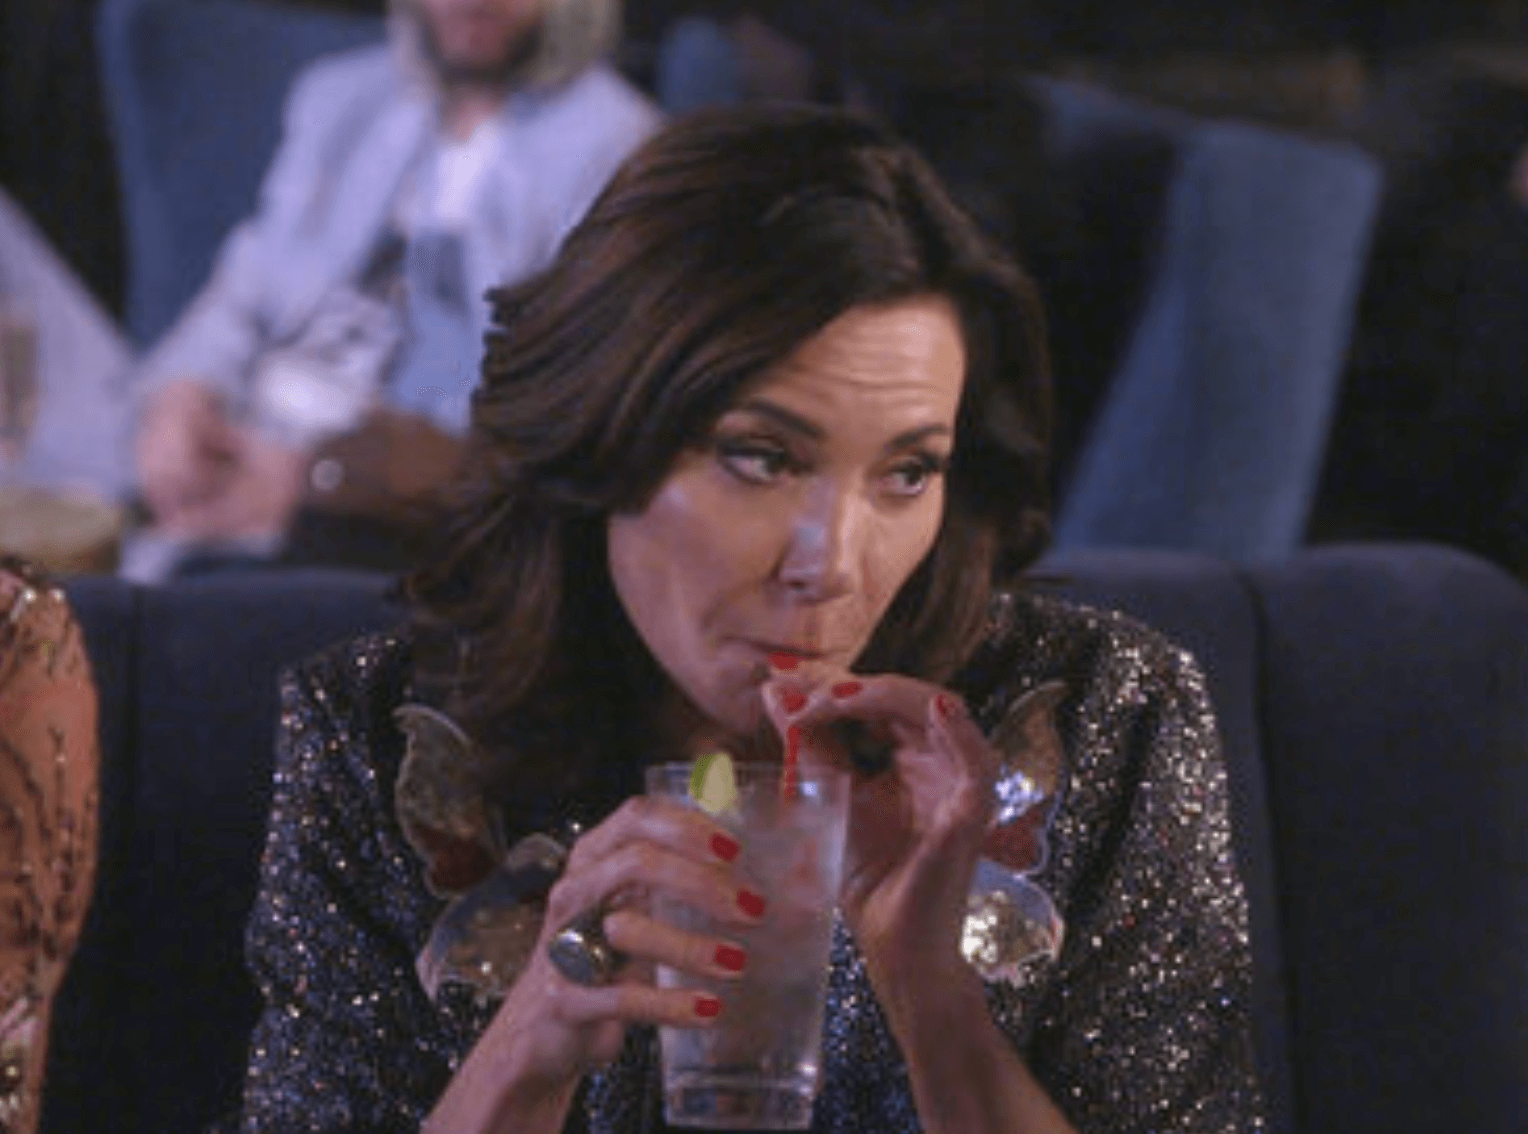 ‘RHONY’ RECAP: Luann de Lesseps Is Boozing Again After Completing Probation!